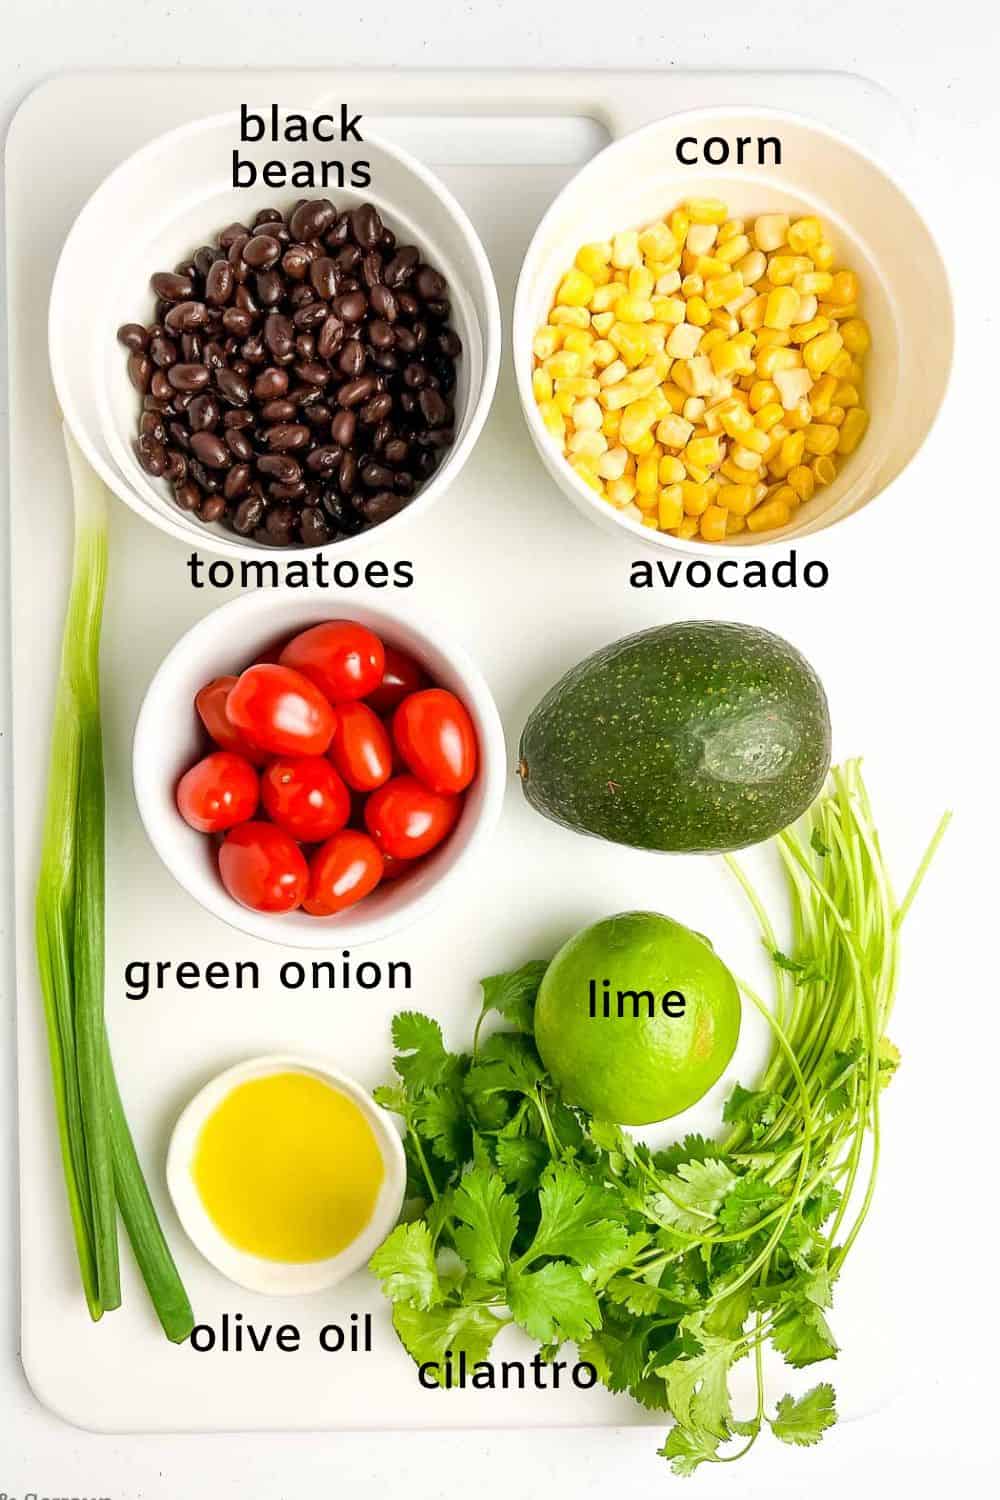 Labelled ingredients for jerk salmon and black bean salad, including black beans, corn, tomatoes, avocado, green onion, lime, olive oil, cilantro and honey.